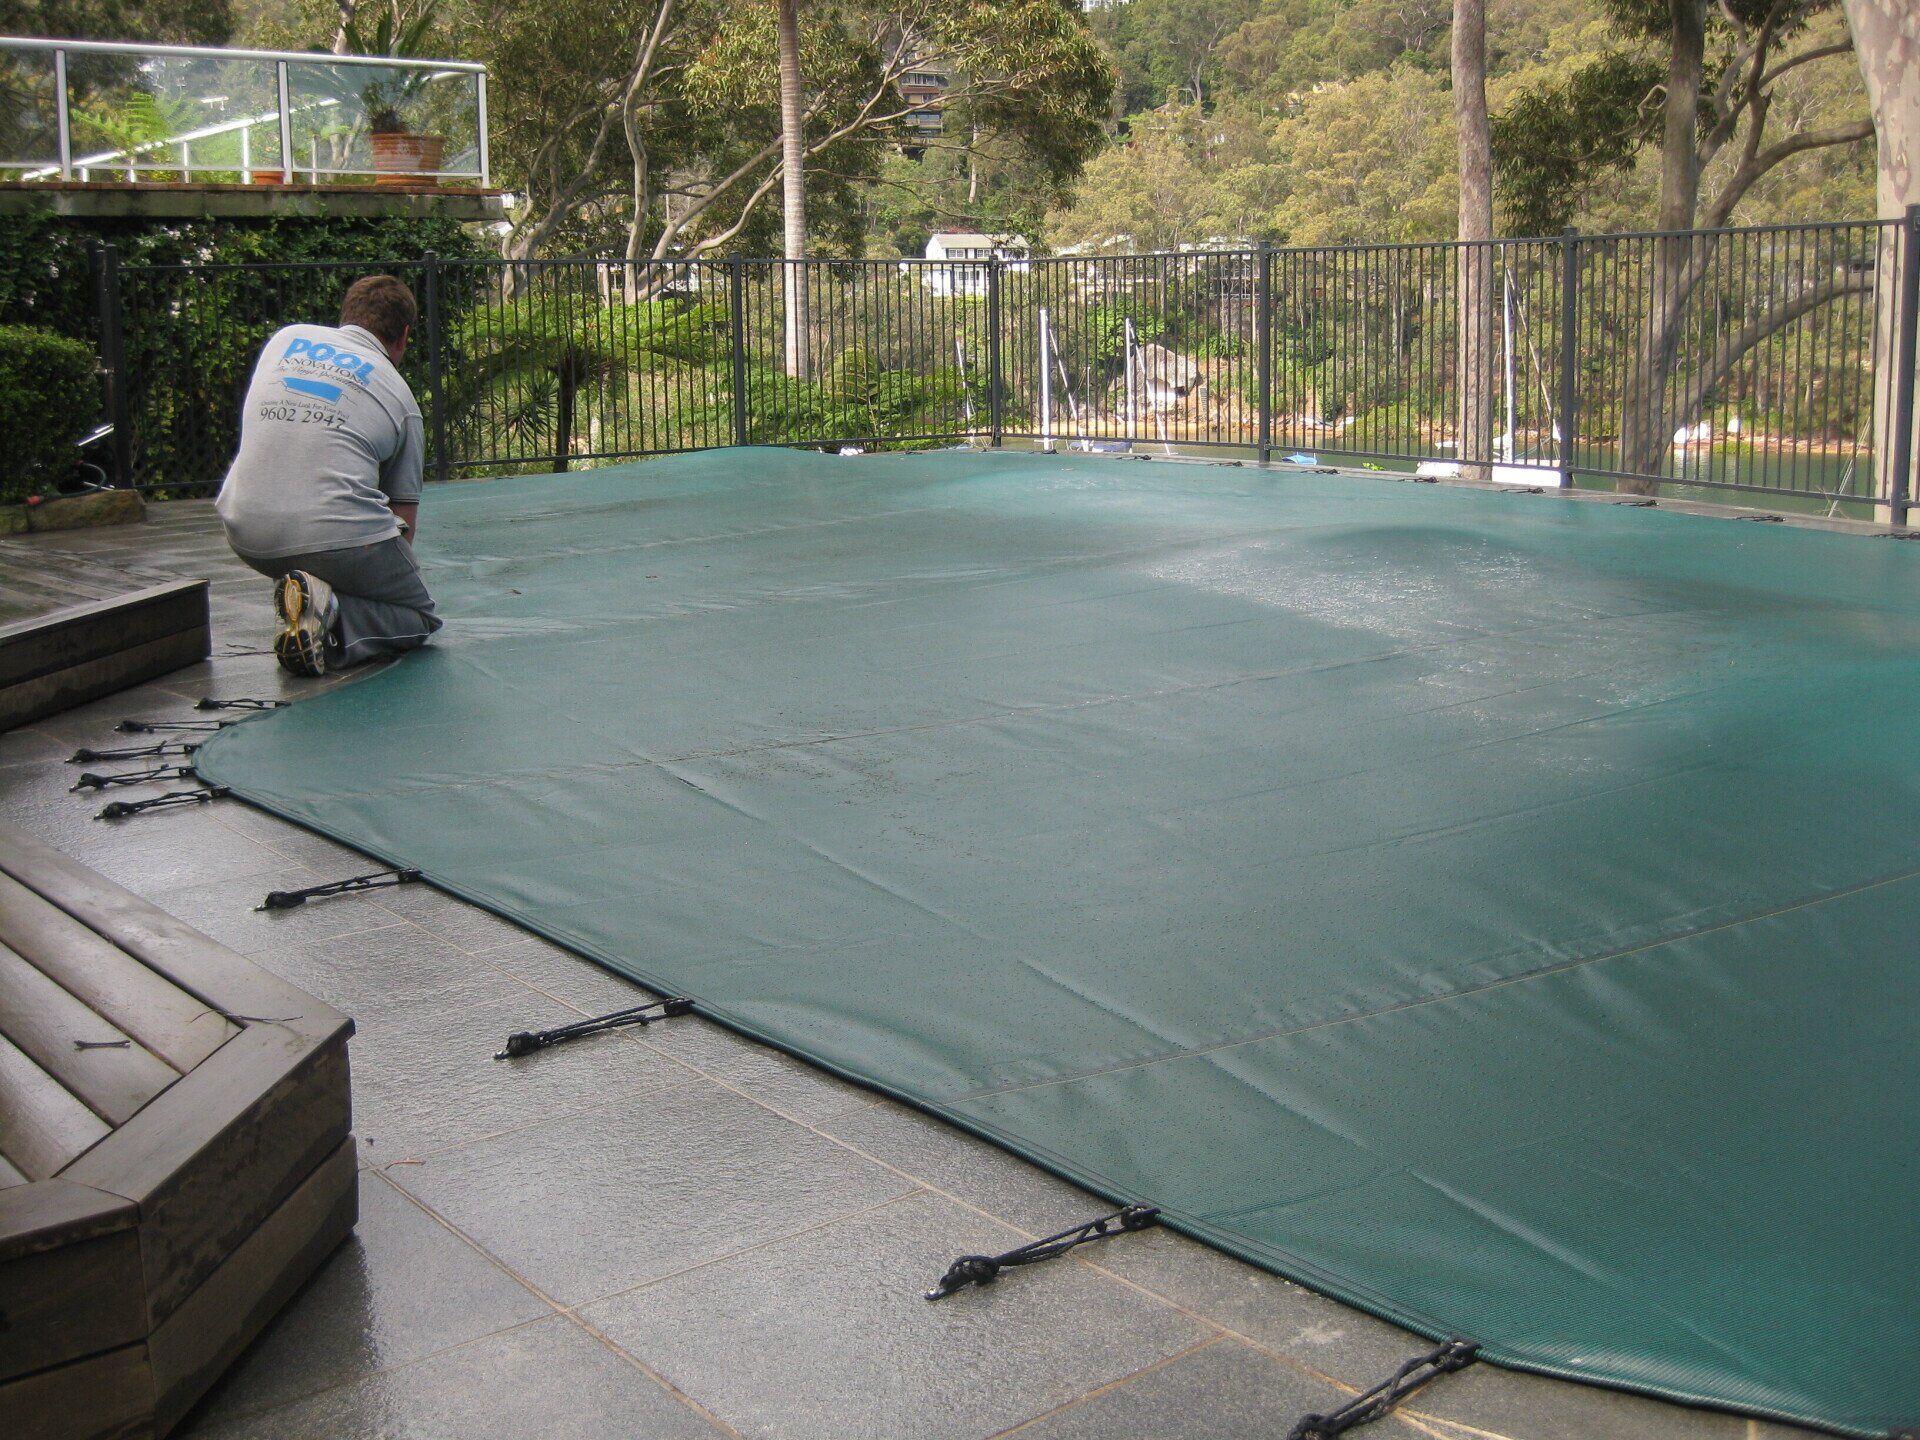 High quality custom pool covers - protect your pool